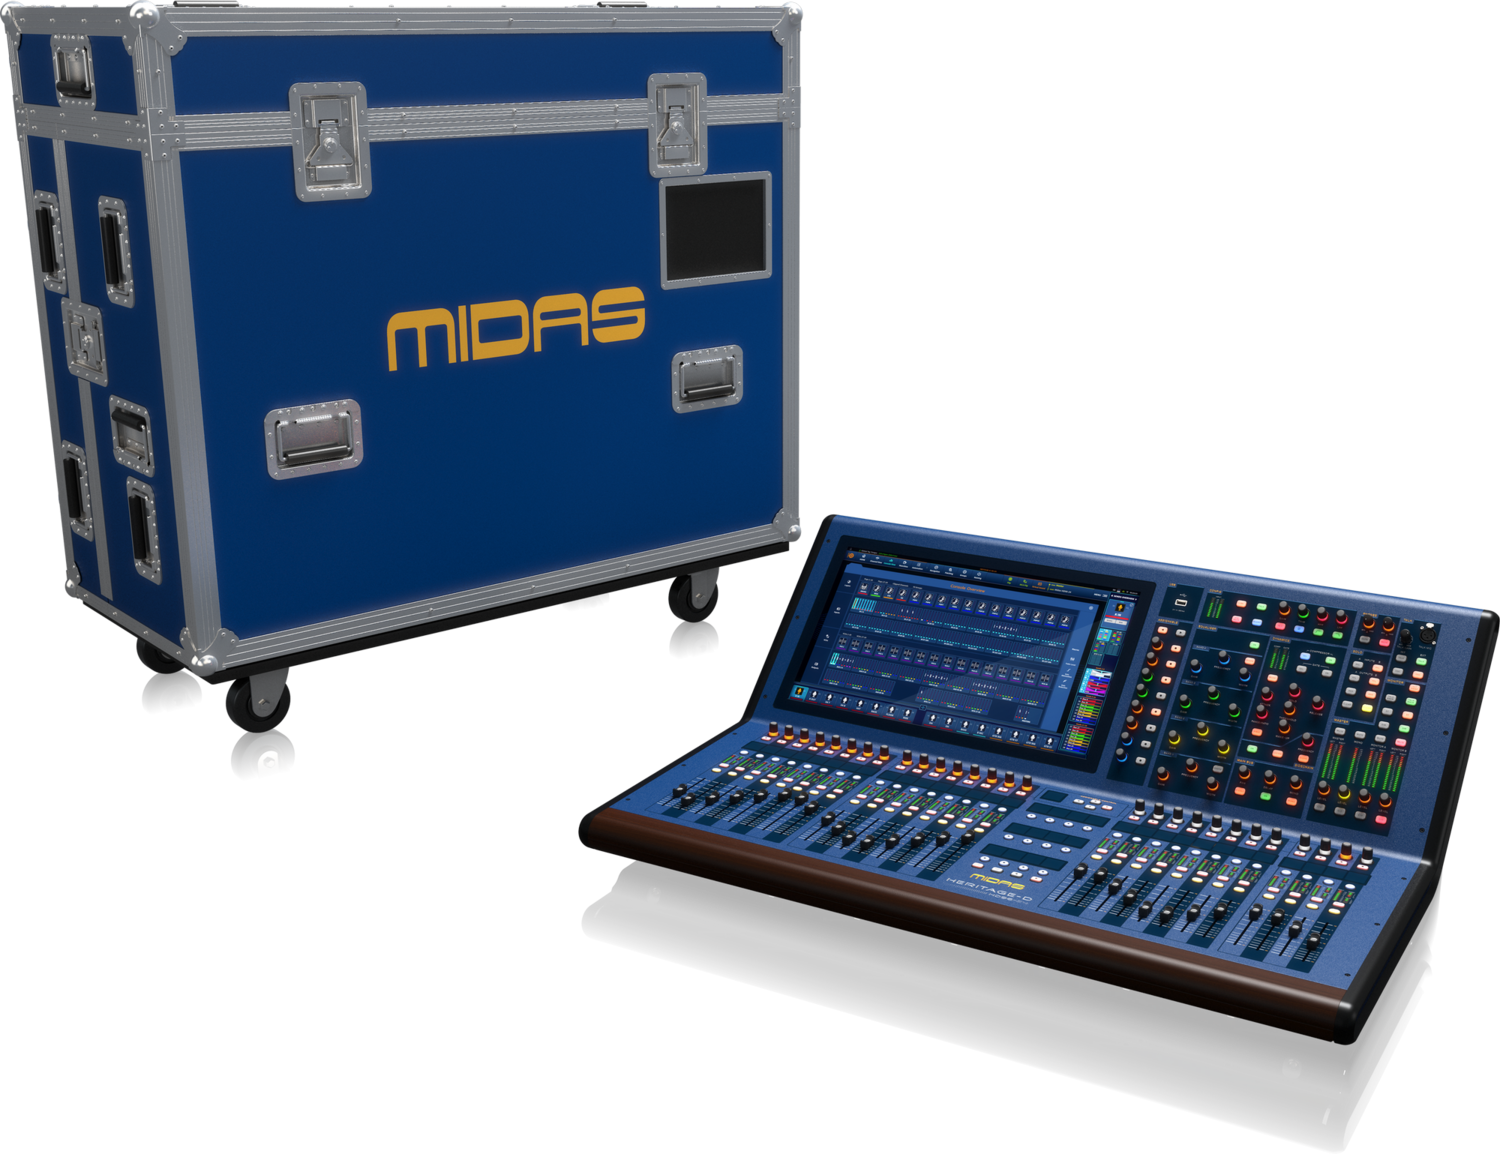 Midas Heritage D HD96-24-CC-TP Digital Mixer Tour Pack
144-input Digital Mixer with 28 Motorized Faders, 21" Touchscreen, Digital Effects, and Tour-grade Case